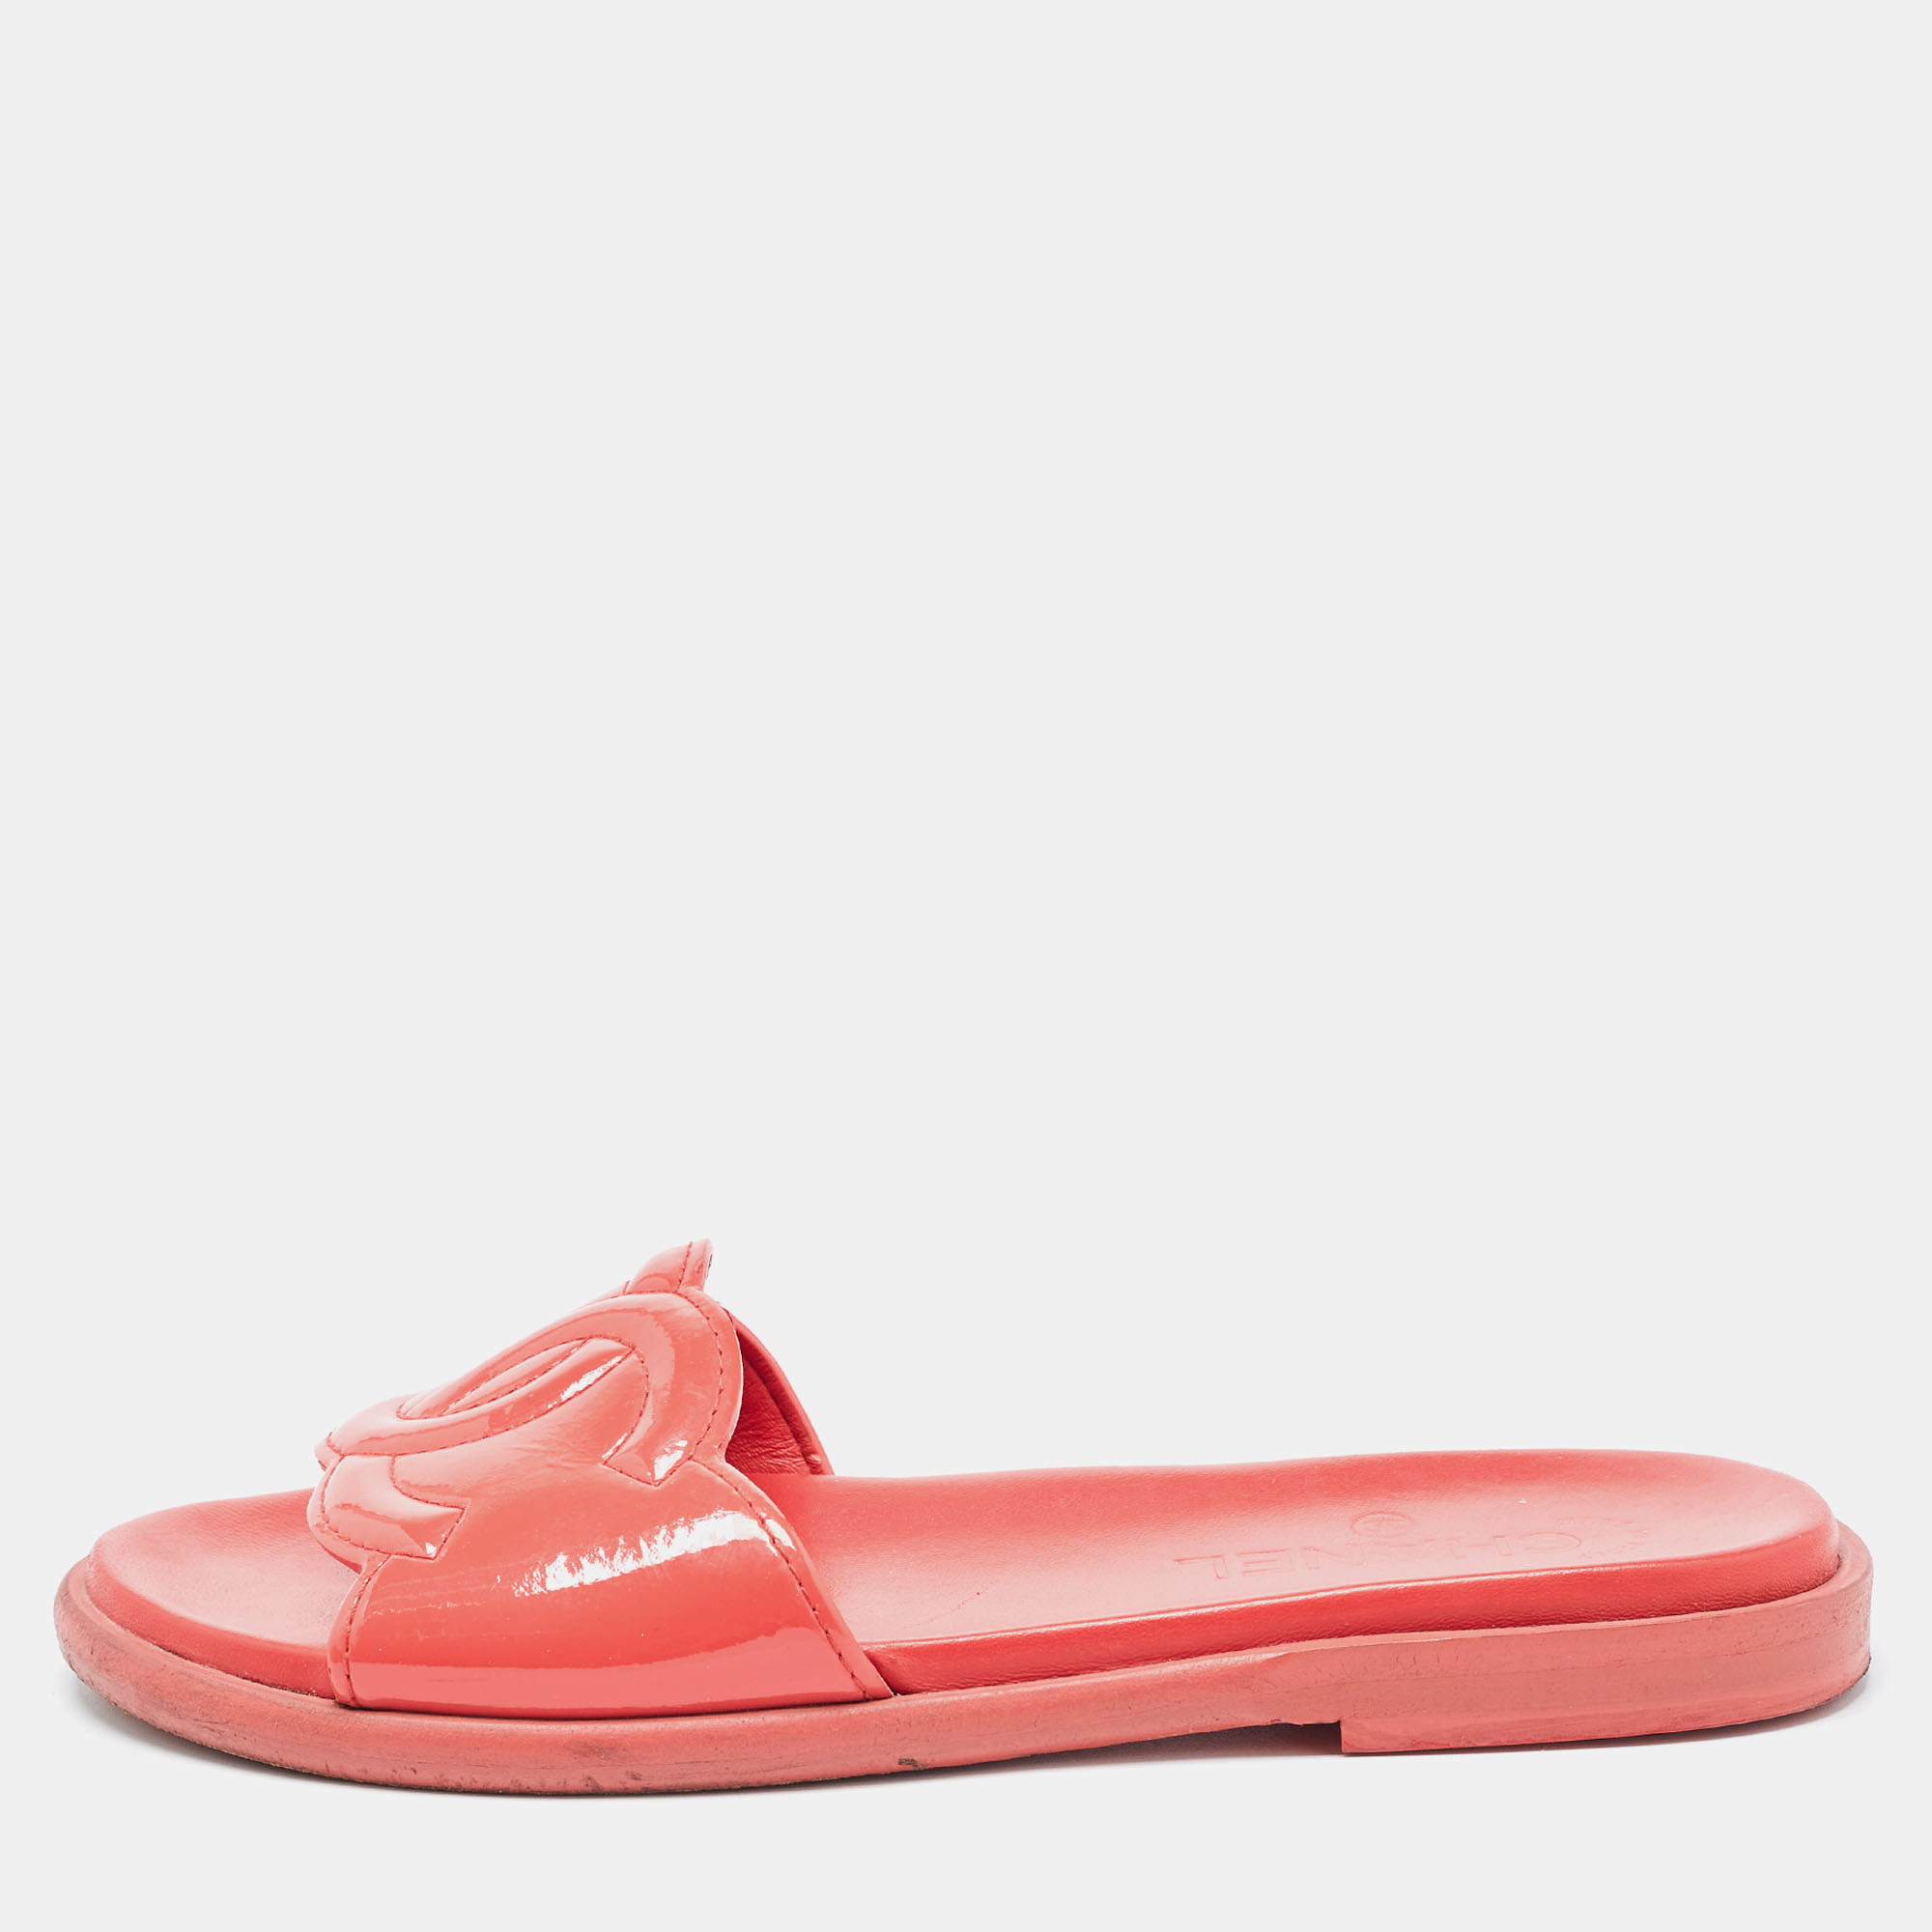 Chanel red patent leather cc slides size 37